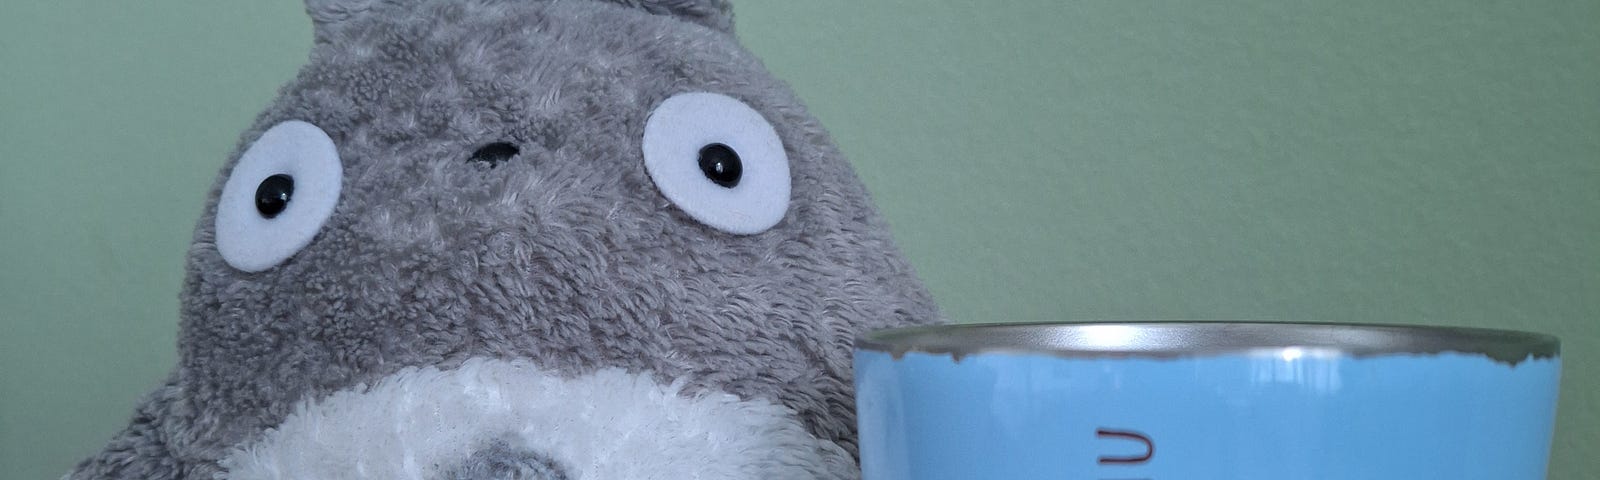 Grey and white soft toy Totoro character and pale blue enamel cup featuring Pikachu, on a wooden table with a pale green background.